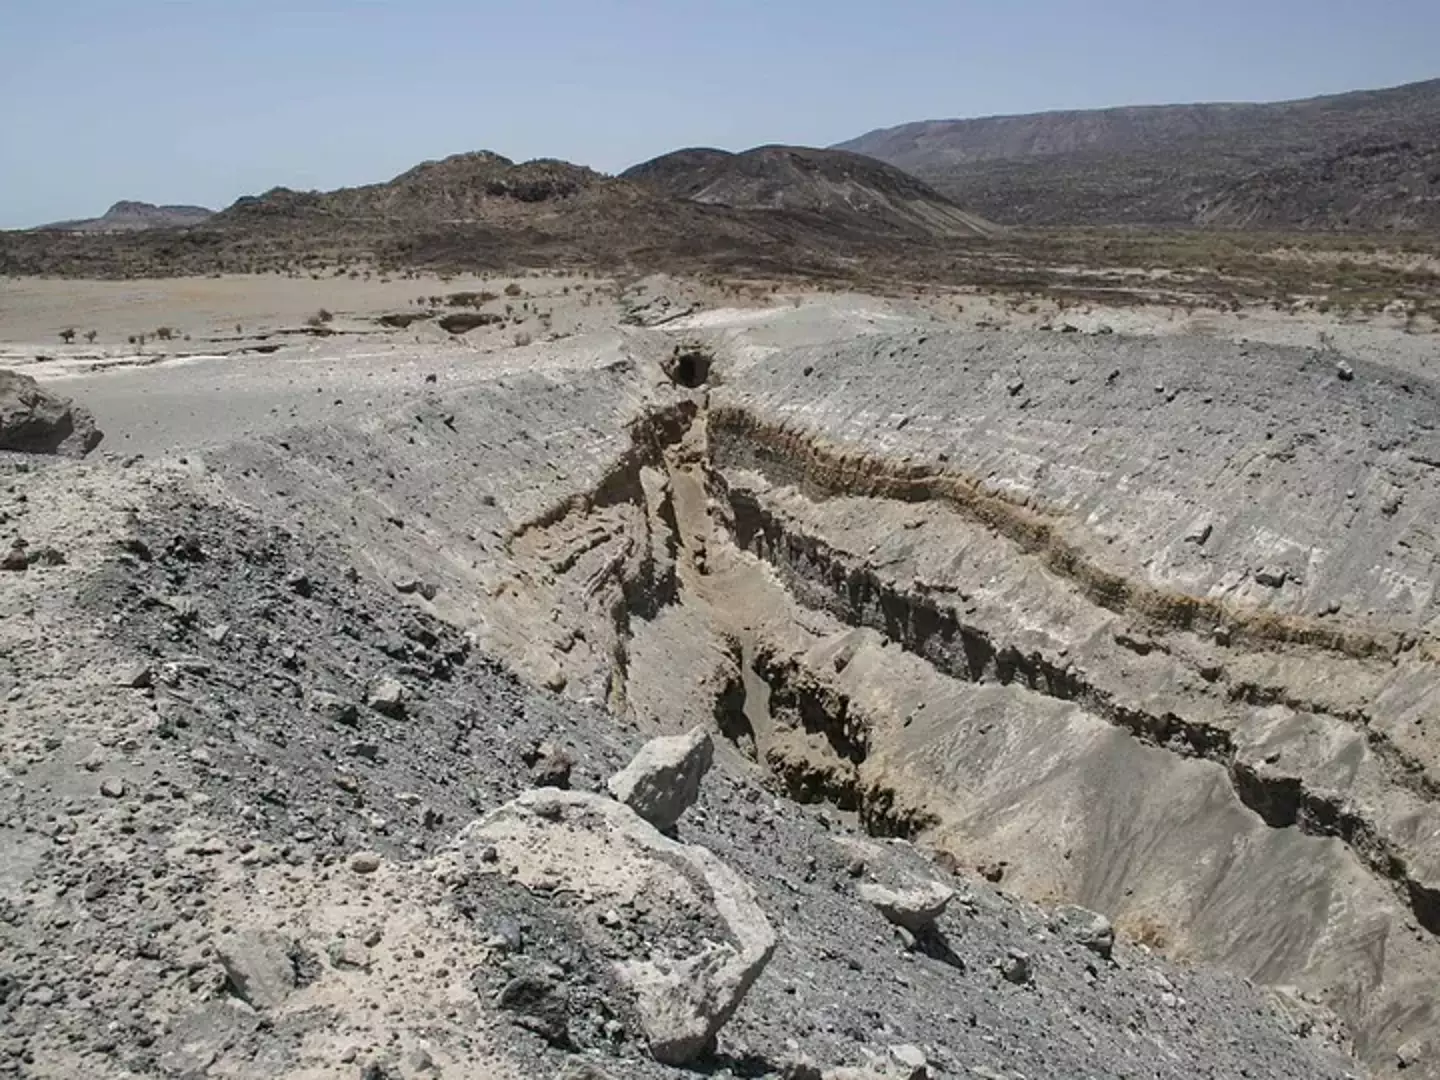 A volcanic vent has opened in the Afar desert in Ethiopia.